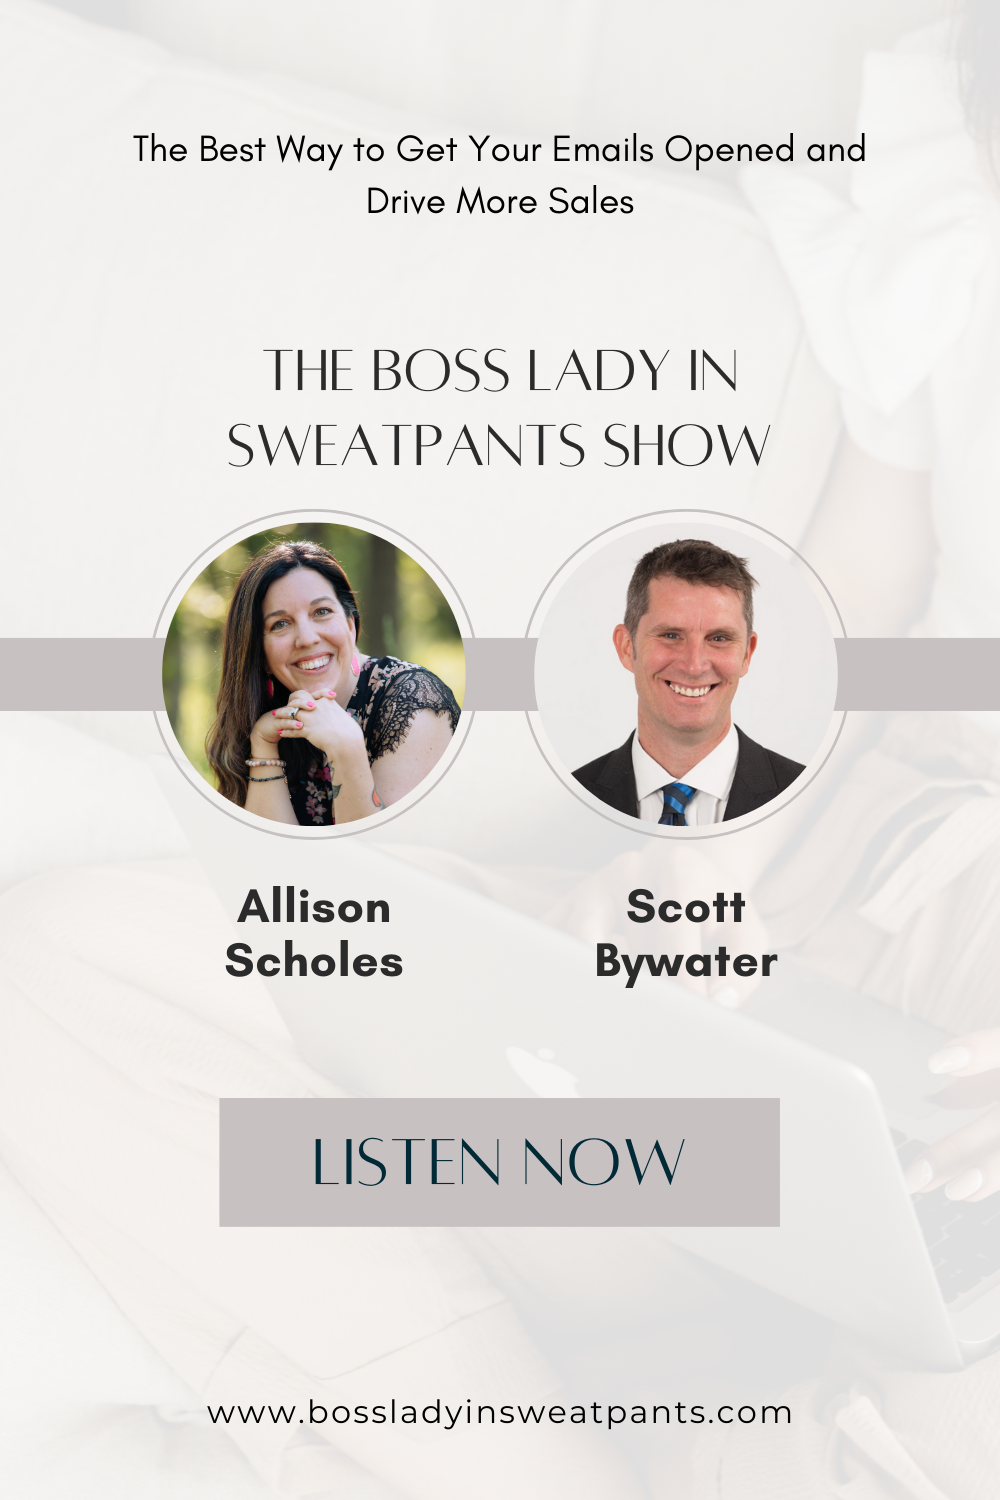 faded photo in the background with two photos of people: Allison Scholes and Scott Bywater for The Boss Lady in Sweatpants Show with title: The Best Way to Get Your Emails Opened and Drive More Sales